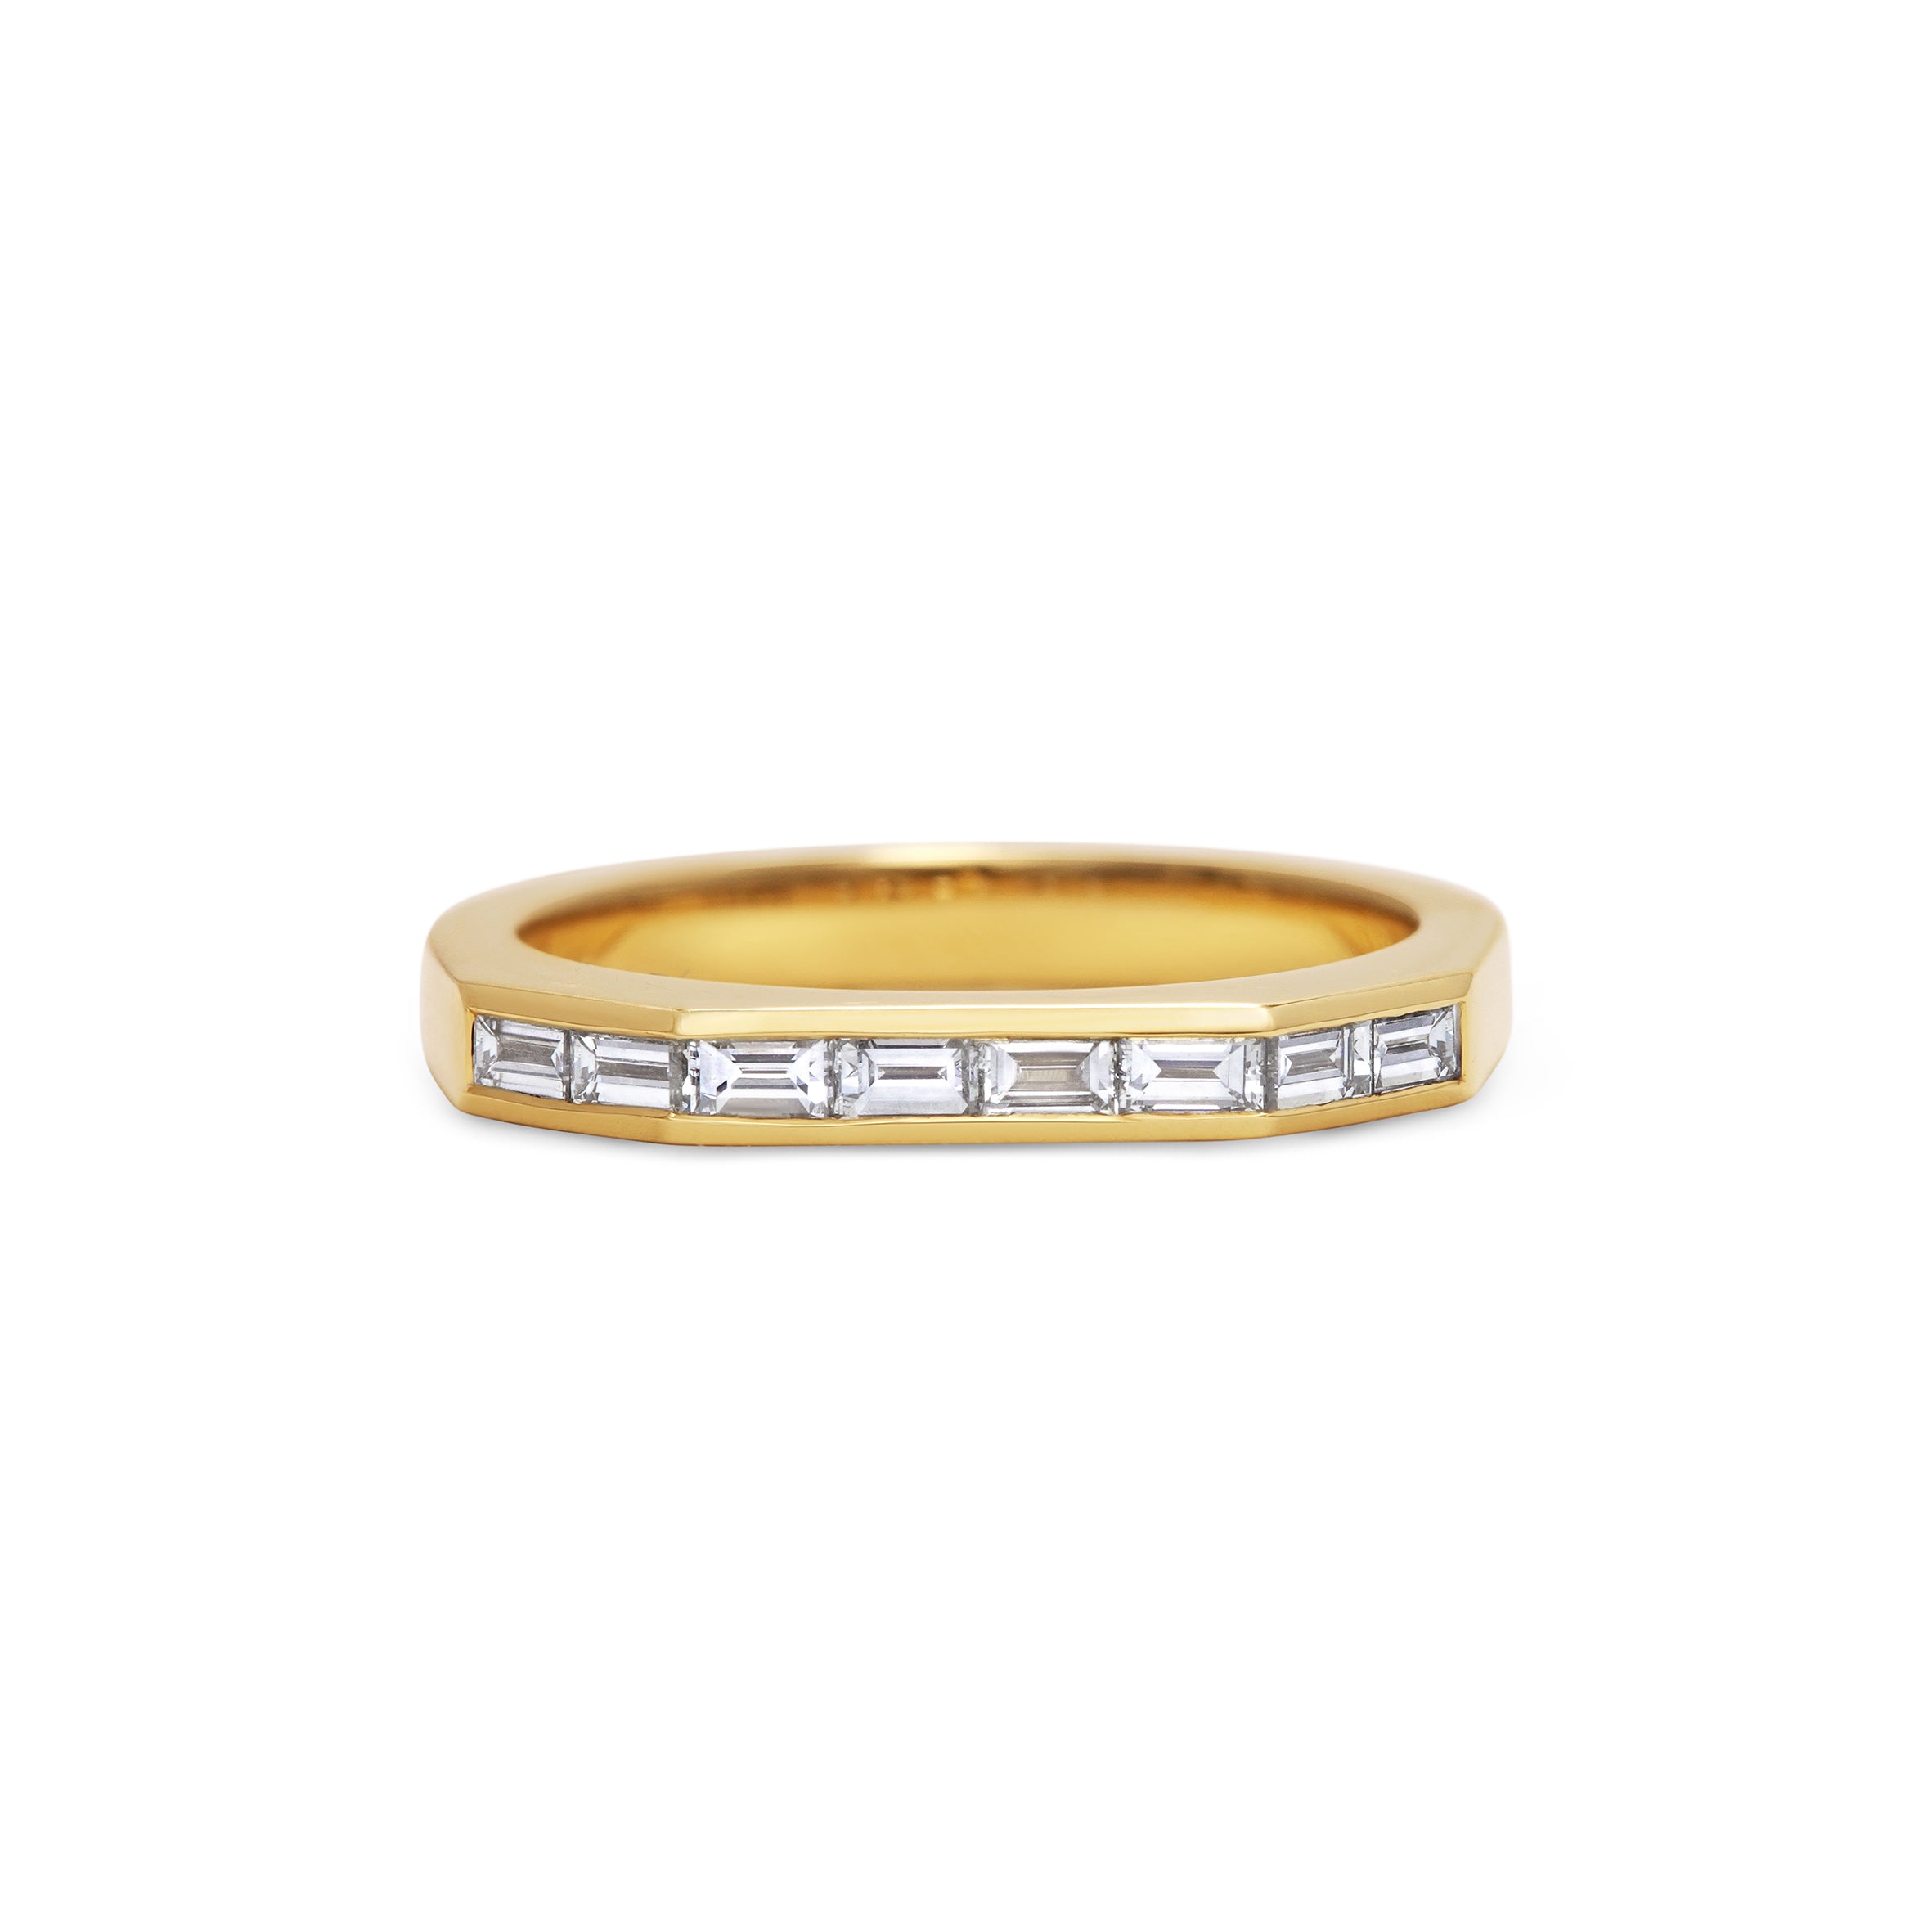 The Baguette Diamond Deco Wedding Band by East London jeweller Rachel Boston | Discover our collections of unique and timeless engagement rings, wedding rings, and modern fine jewellery.